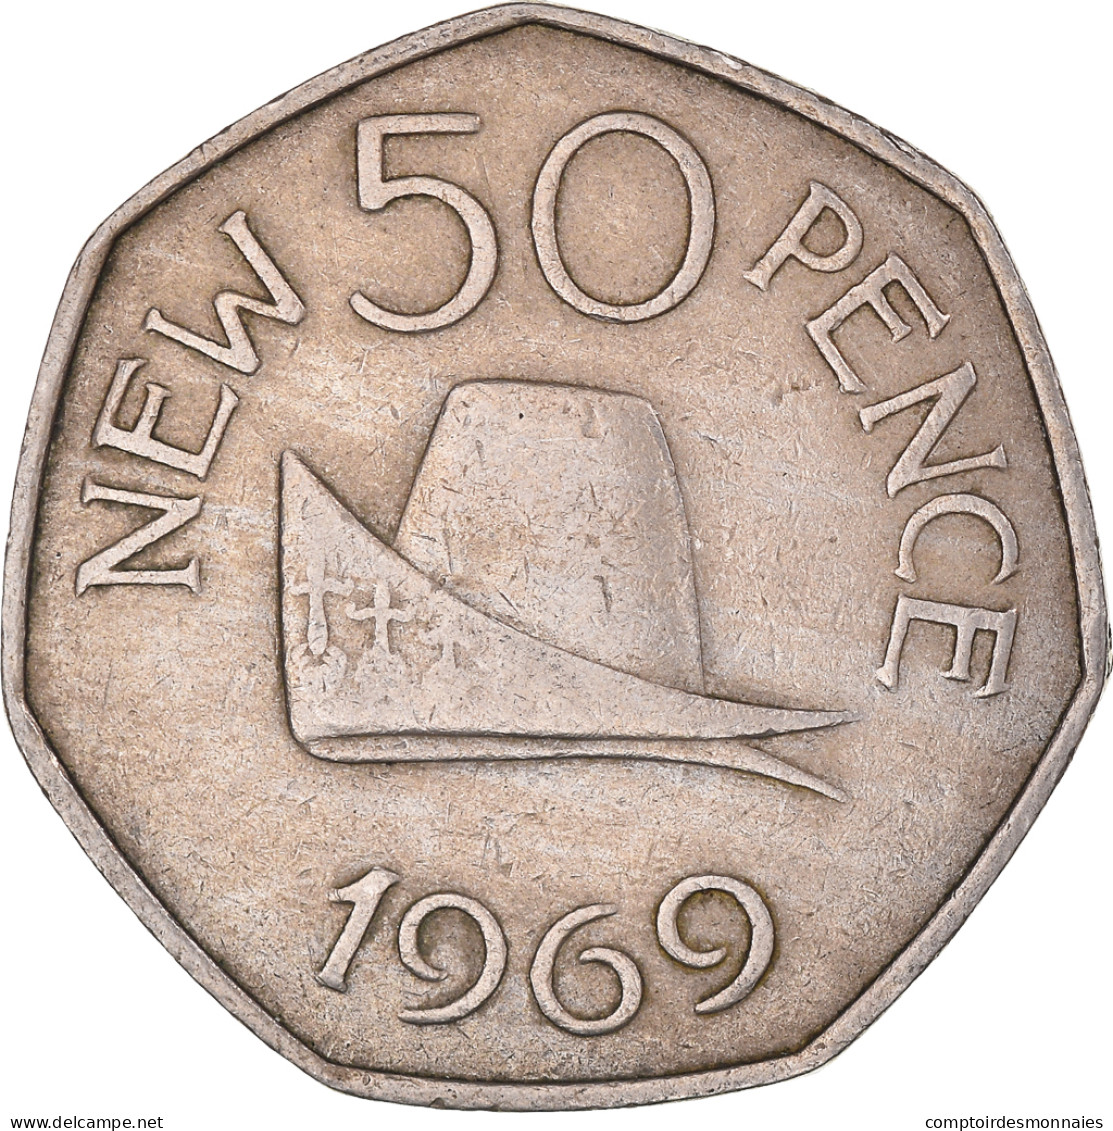 Monnaie, Guernesey, 50 New Pence, 1969 - Guernsey